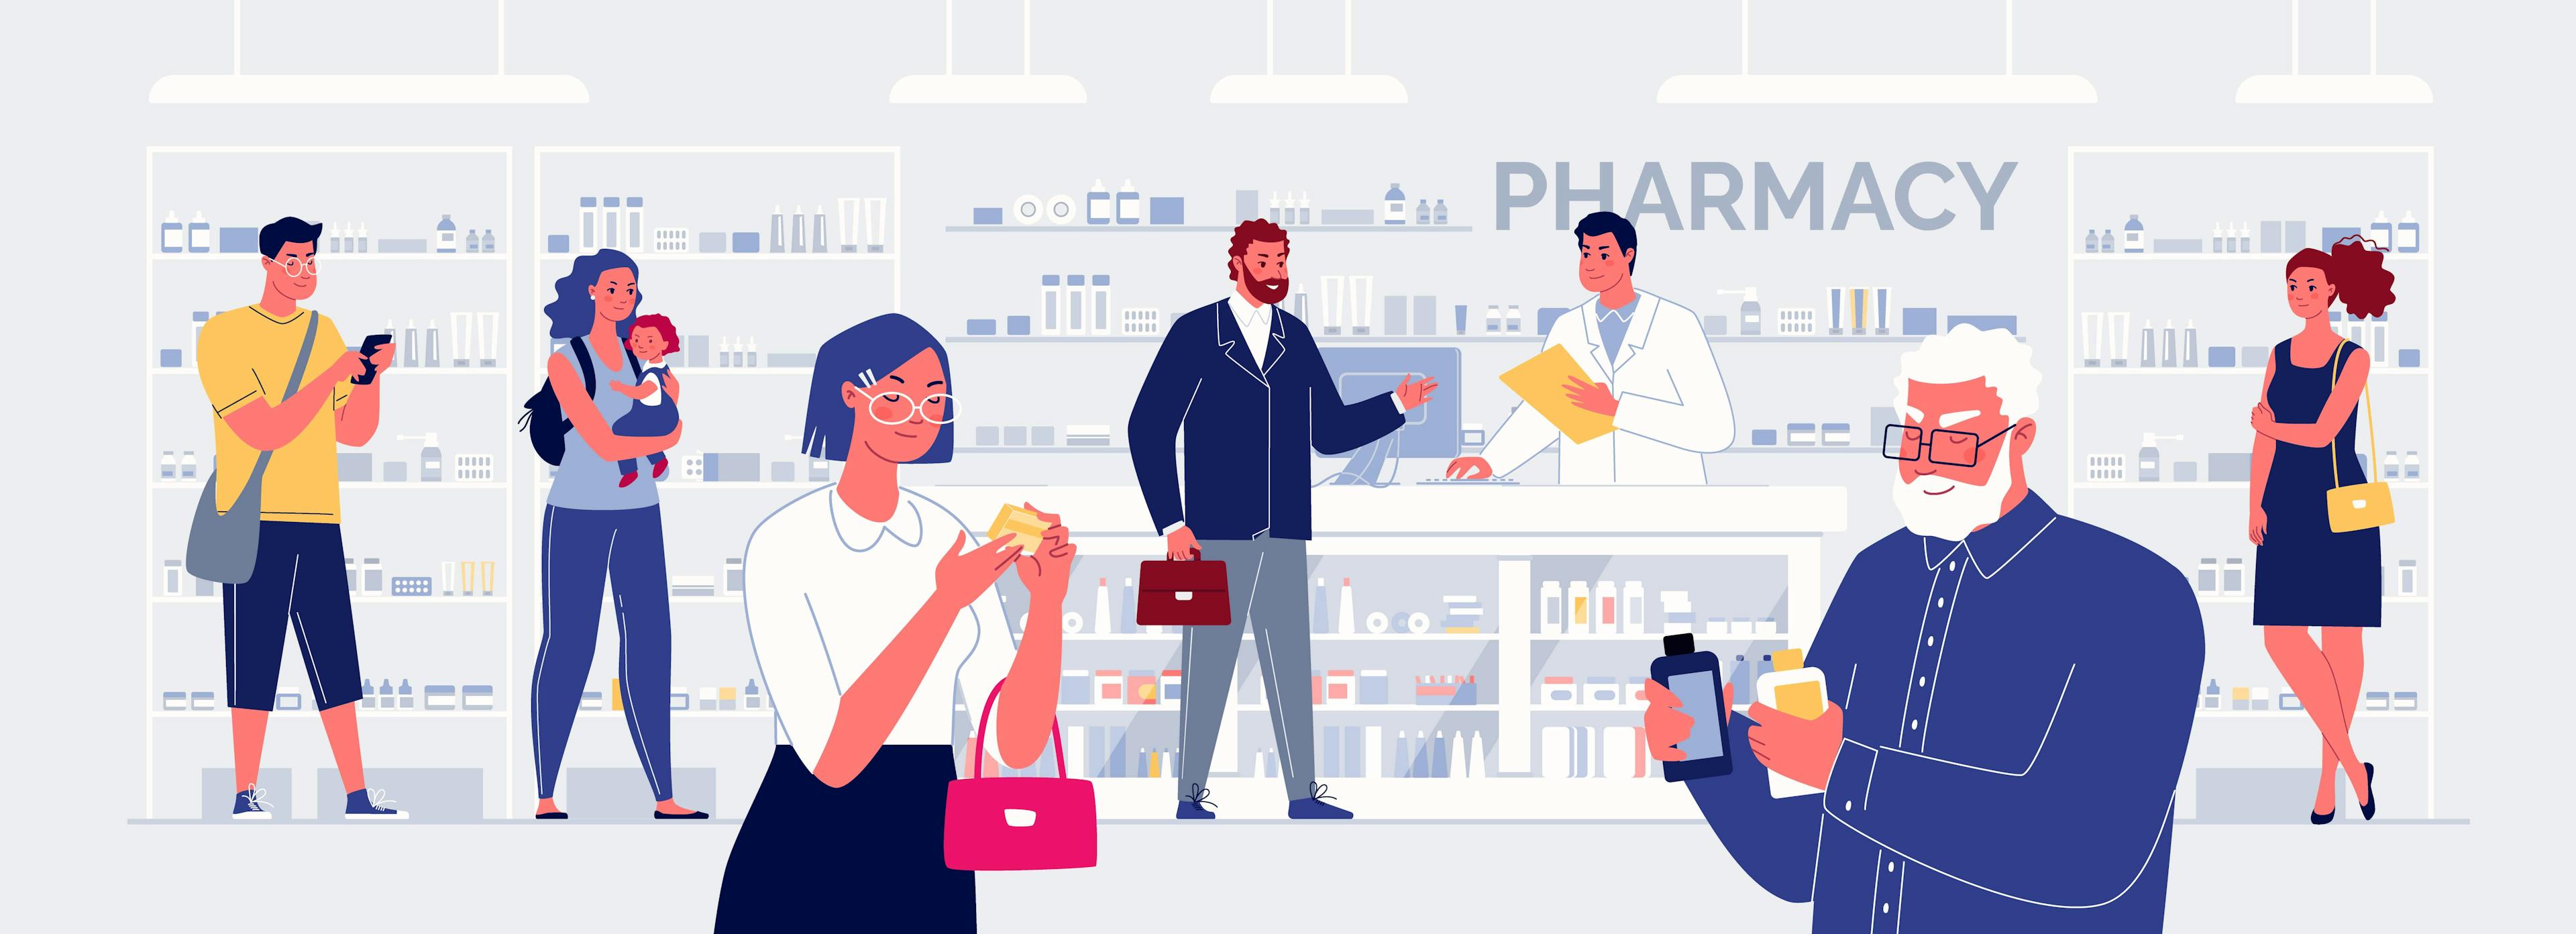 illustration of busy pharmacy with several clients standing around and pharmacist behind counter